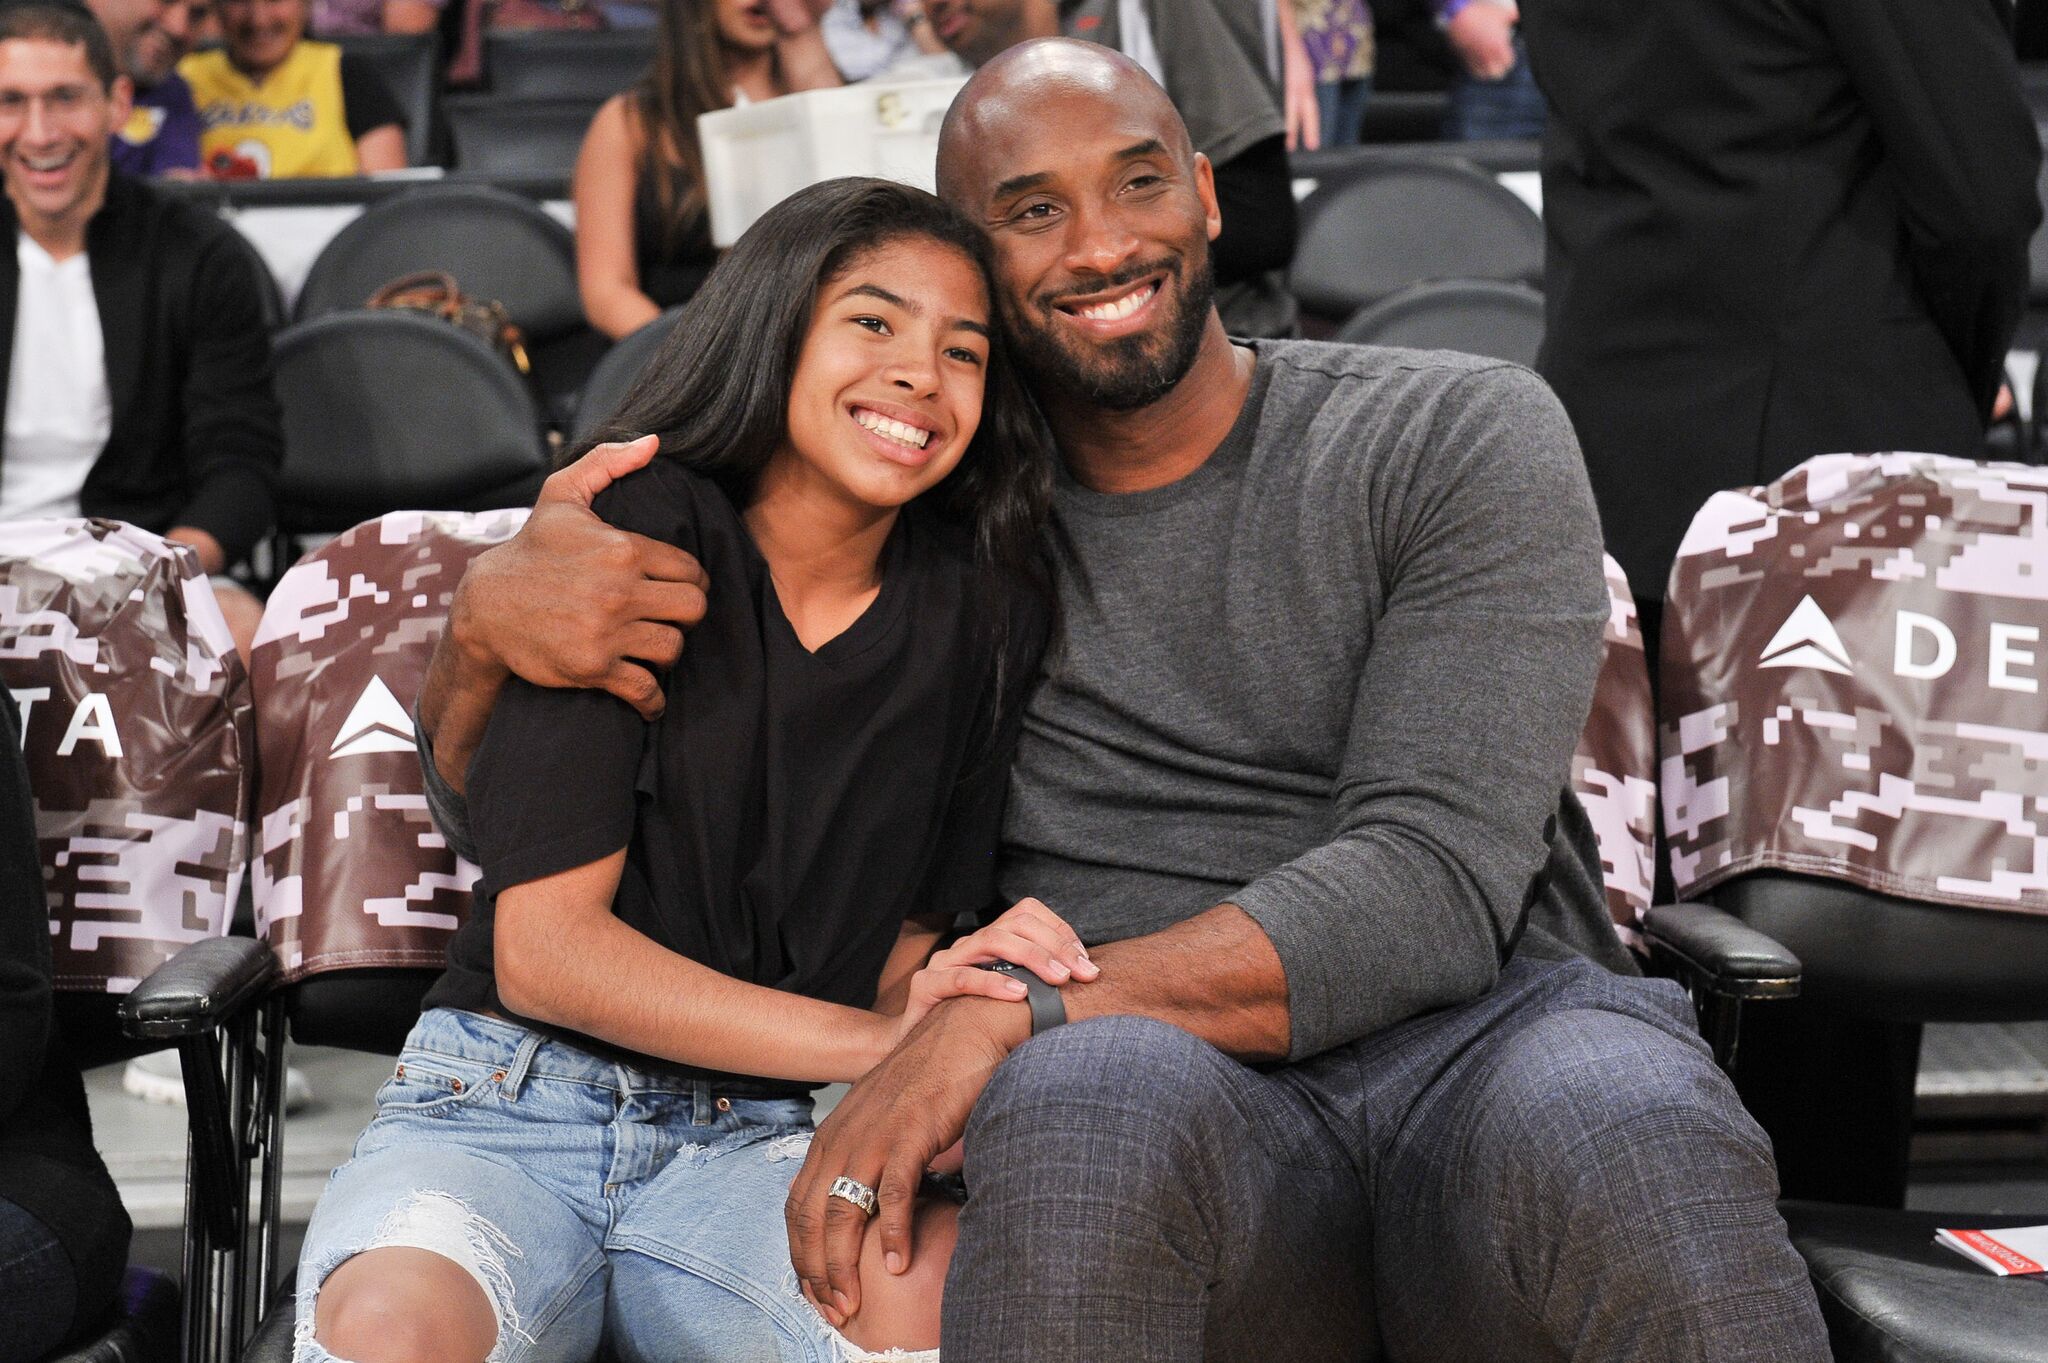 Kobe Bryant and his daughter Gianna Bryant attend a basketball game at Staples Center on November 17, 2019 in Los Angeles, California. | Source: Getty Images